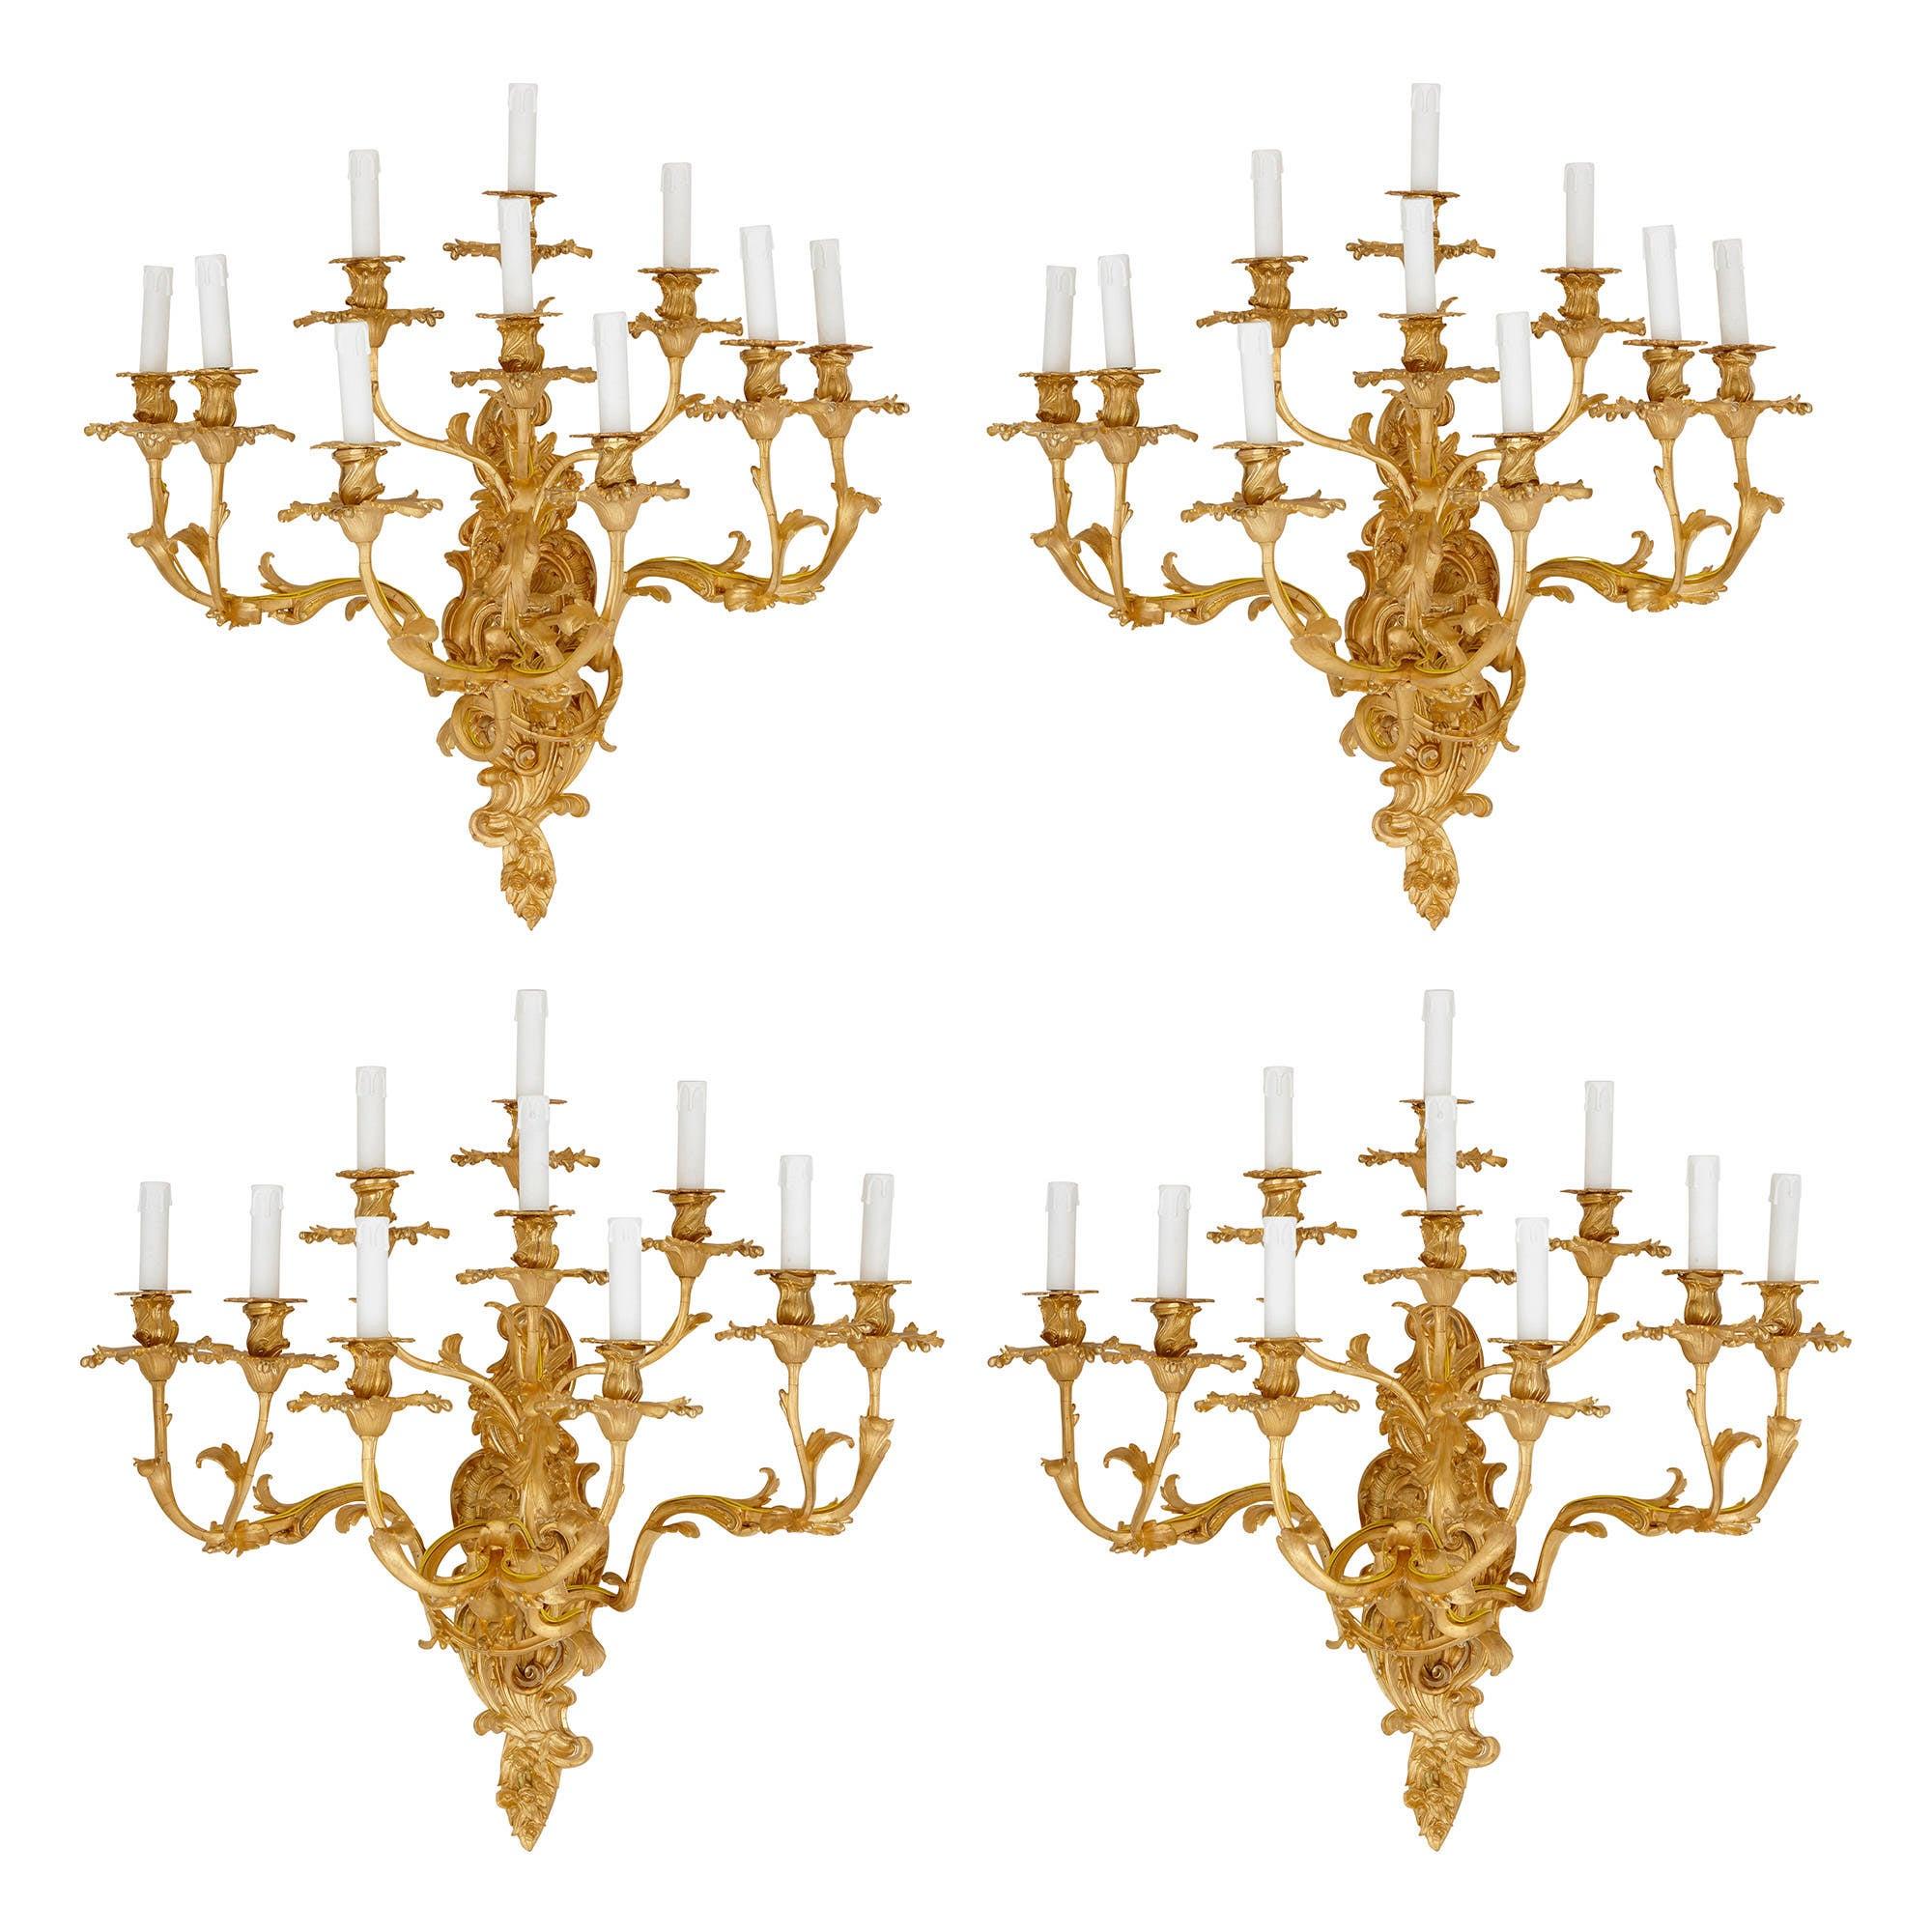 Four Antique Rococo Style Gilt Bronze Wall Sconces For Sale